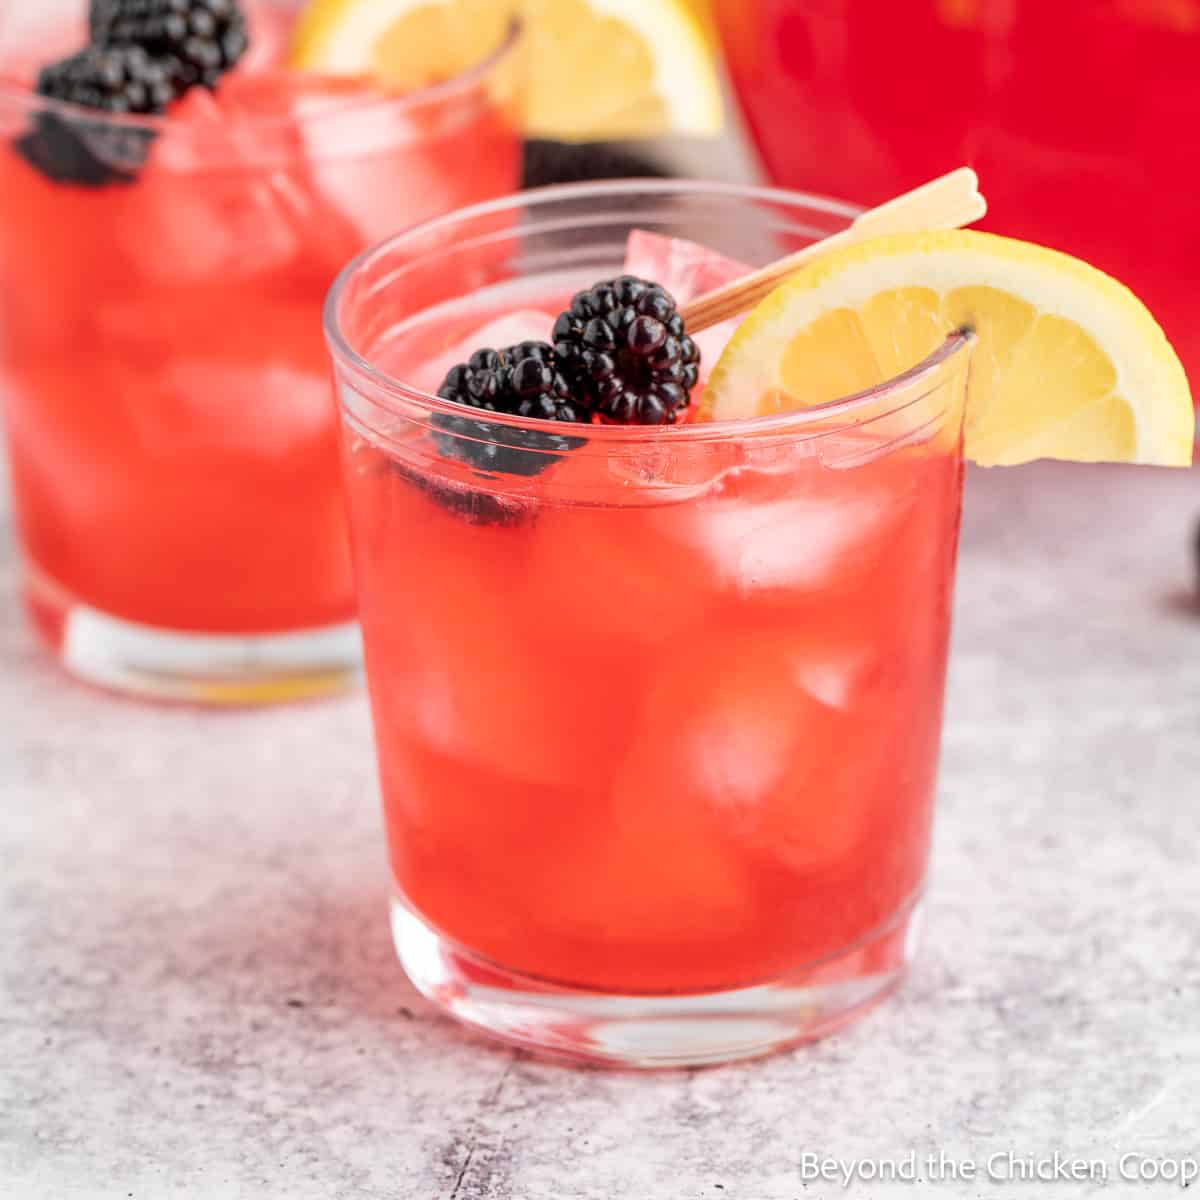 A glass filled with blackberry lemonade.